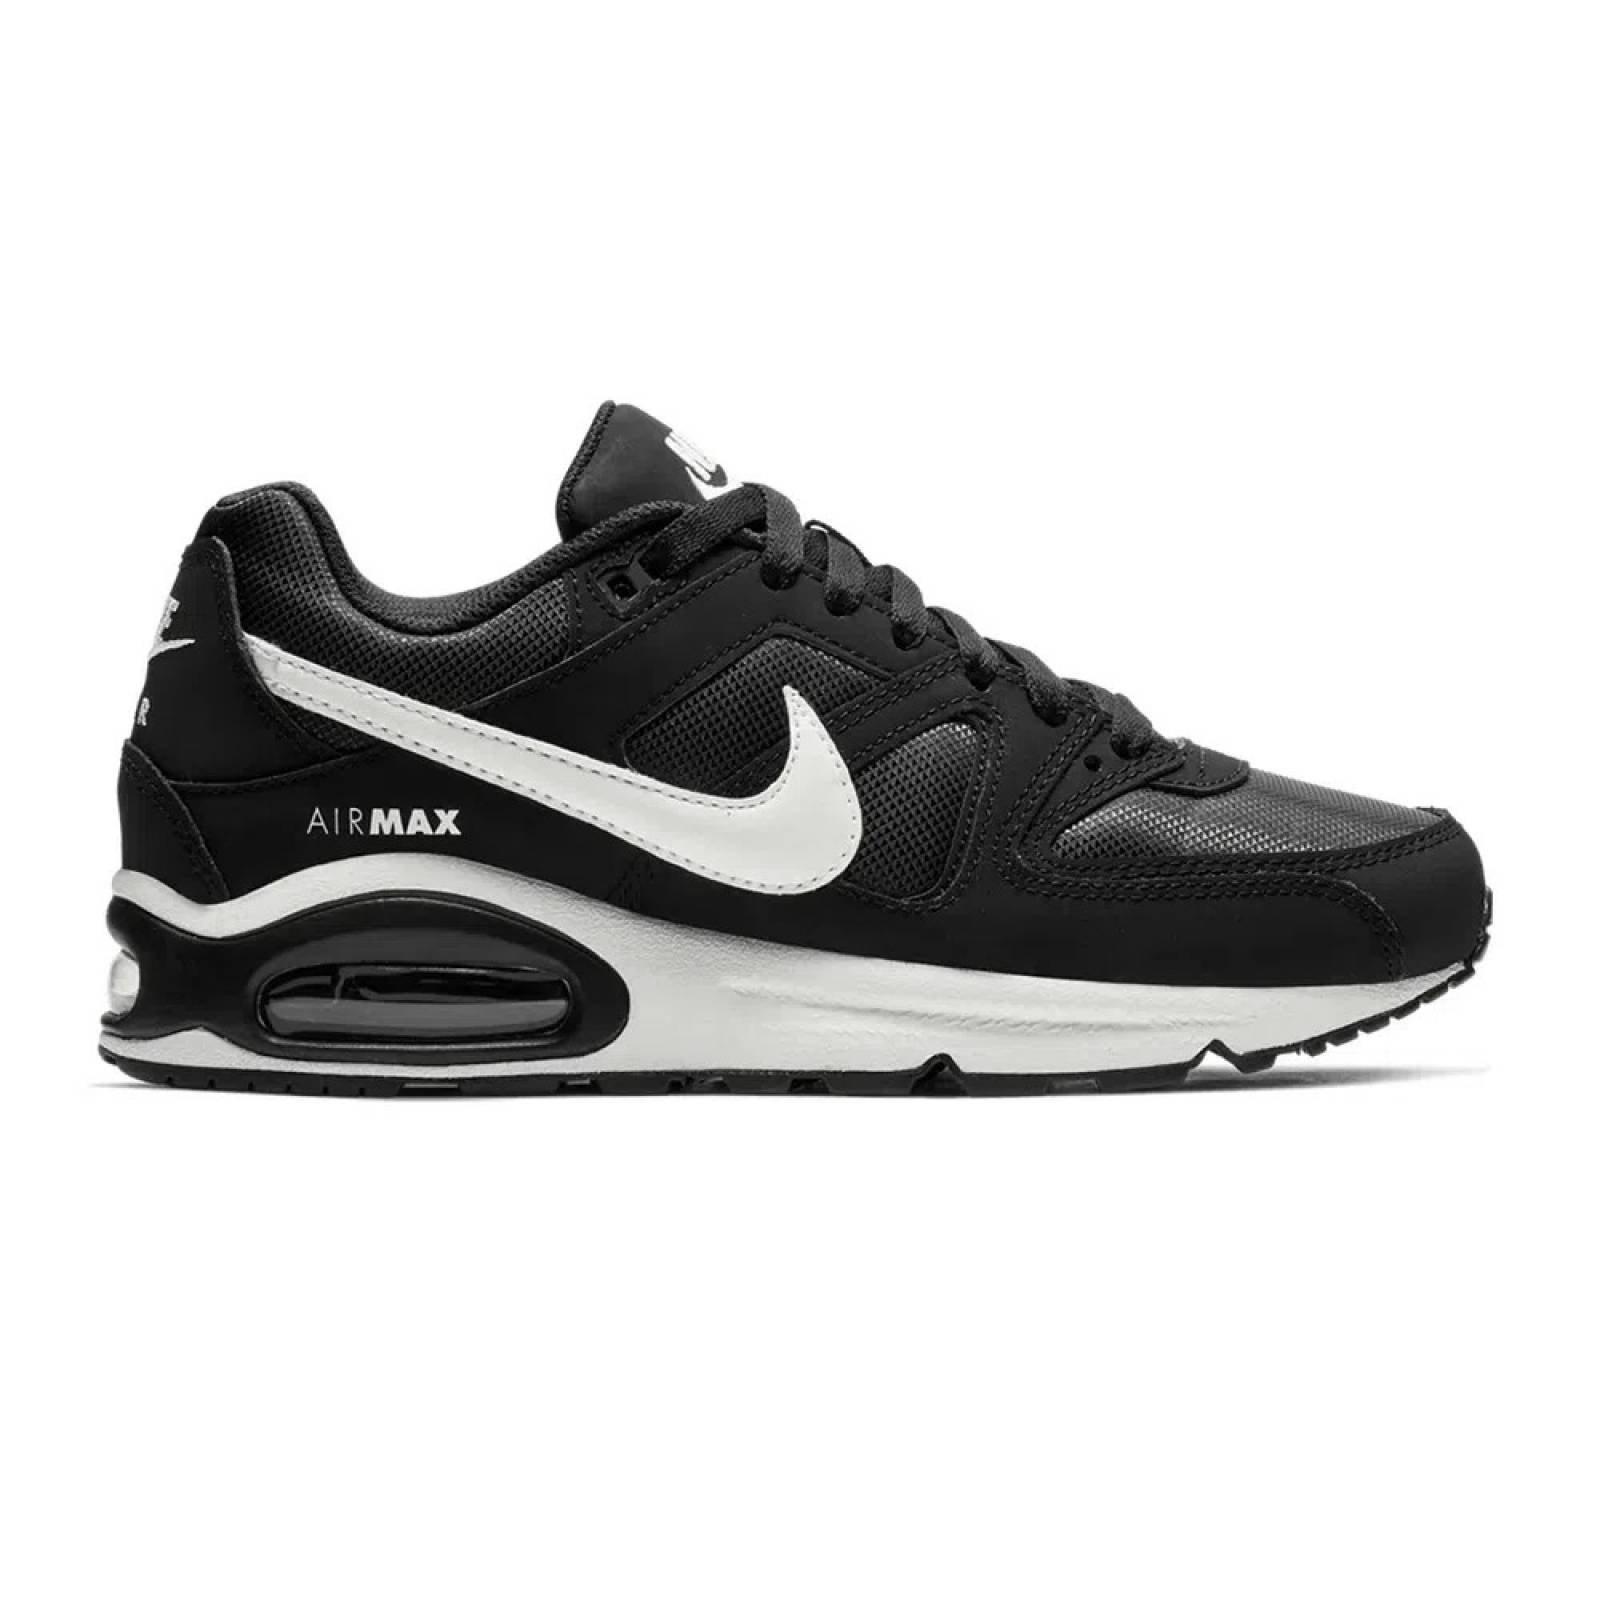 TENIS NIKE AIR MAX COMMAND MUJER NEGROS CASUAL STROLL